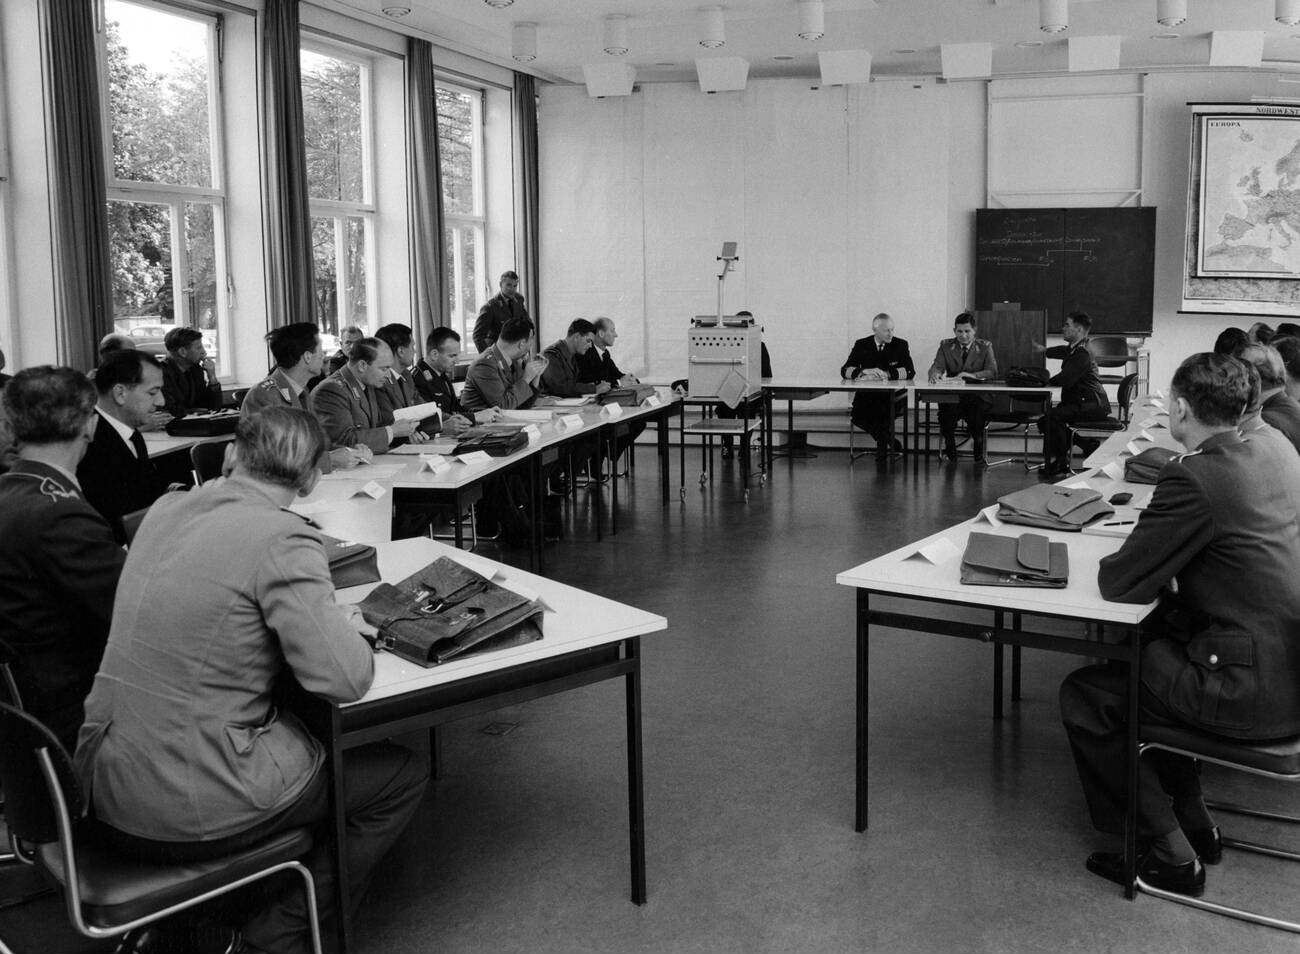 Classes at the Bundeswehr Command and Staff College in Hamburg.